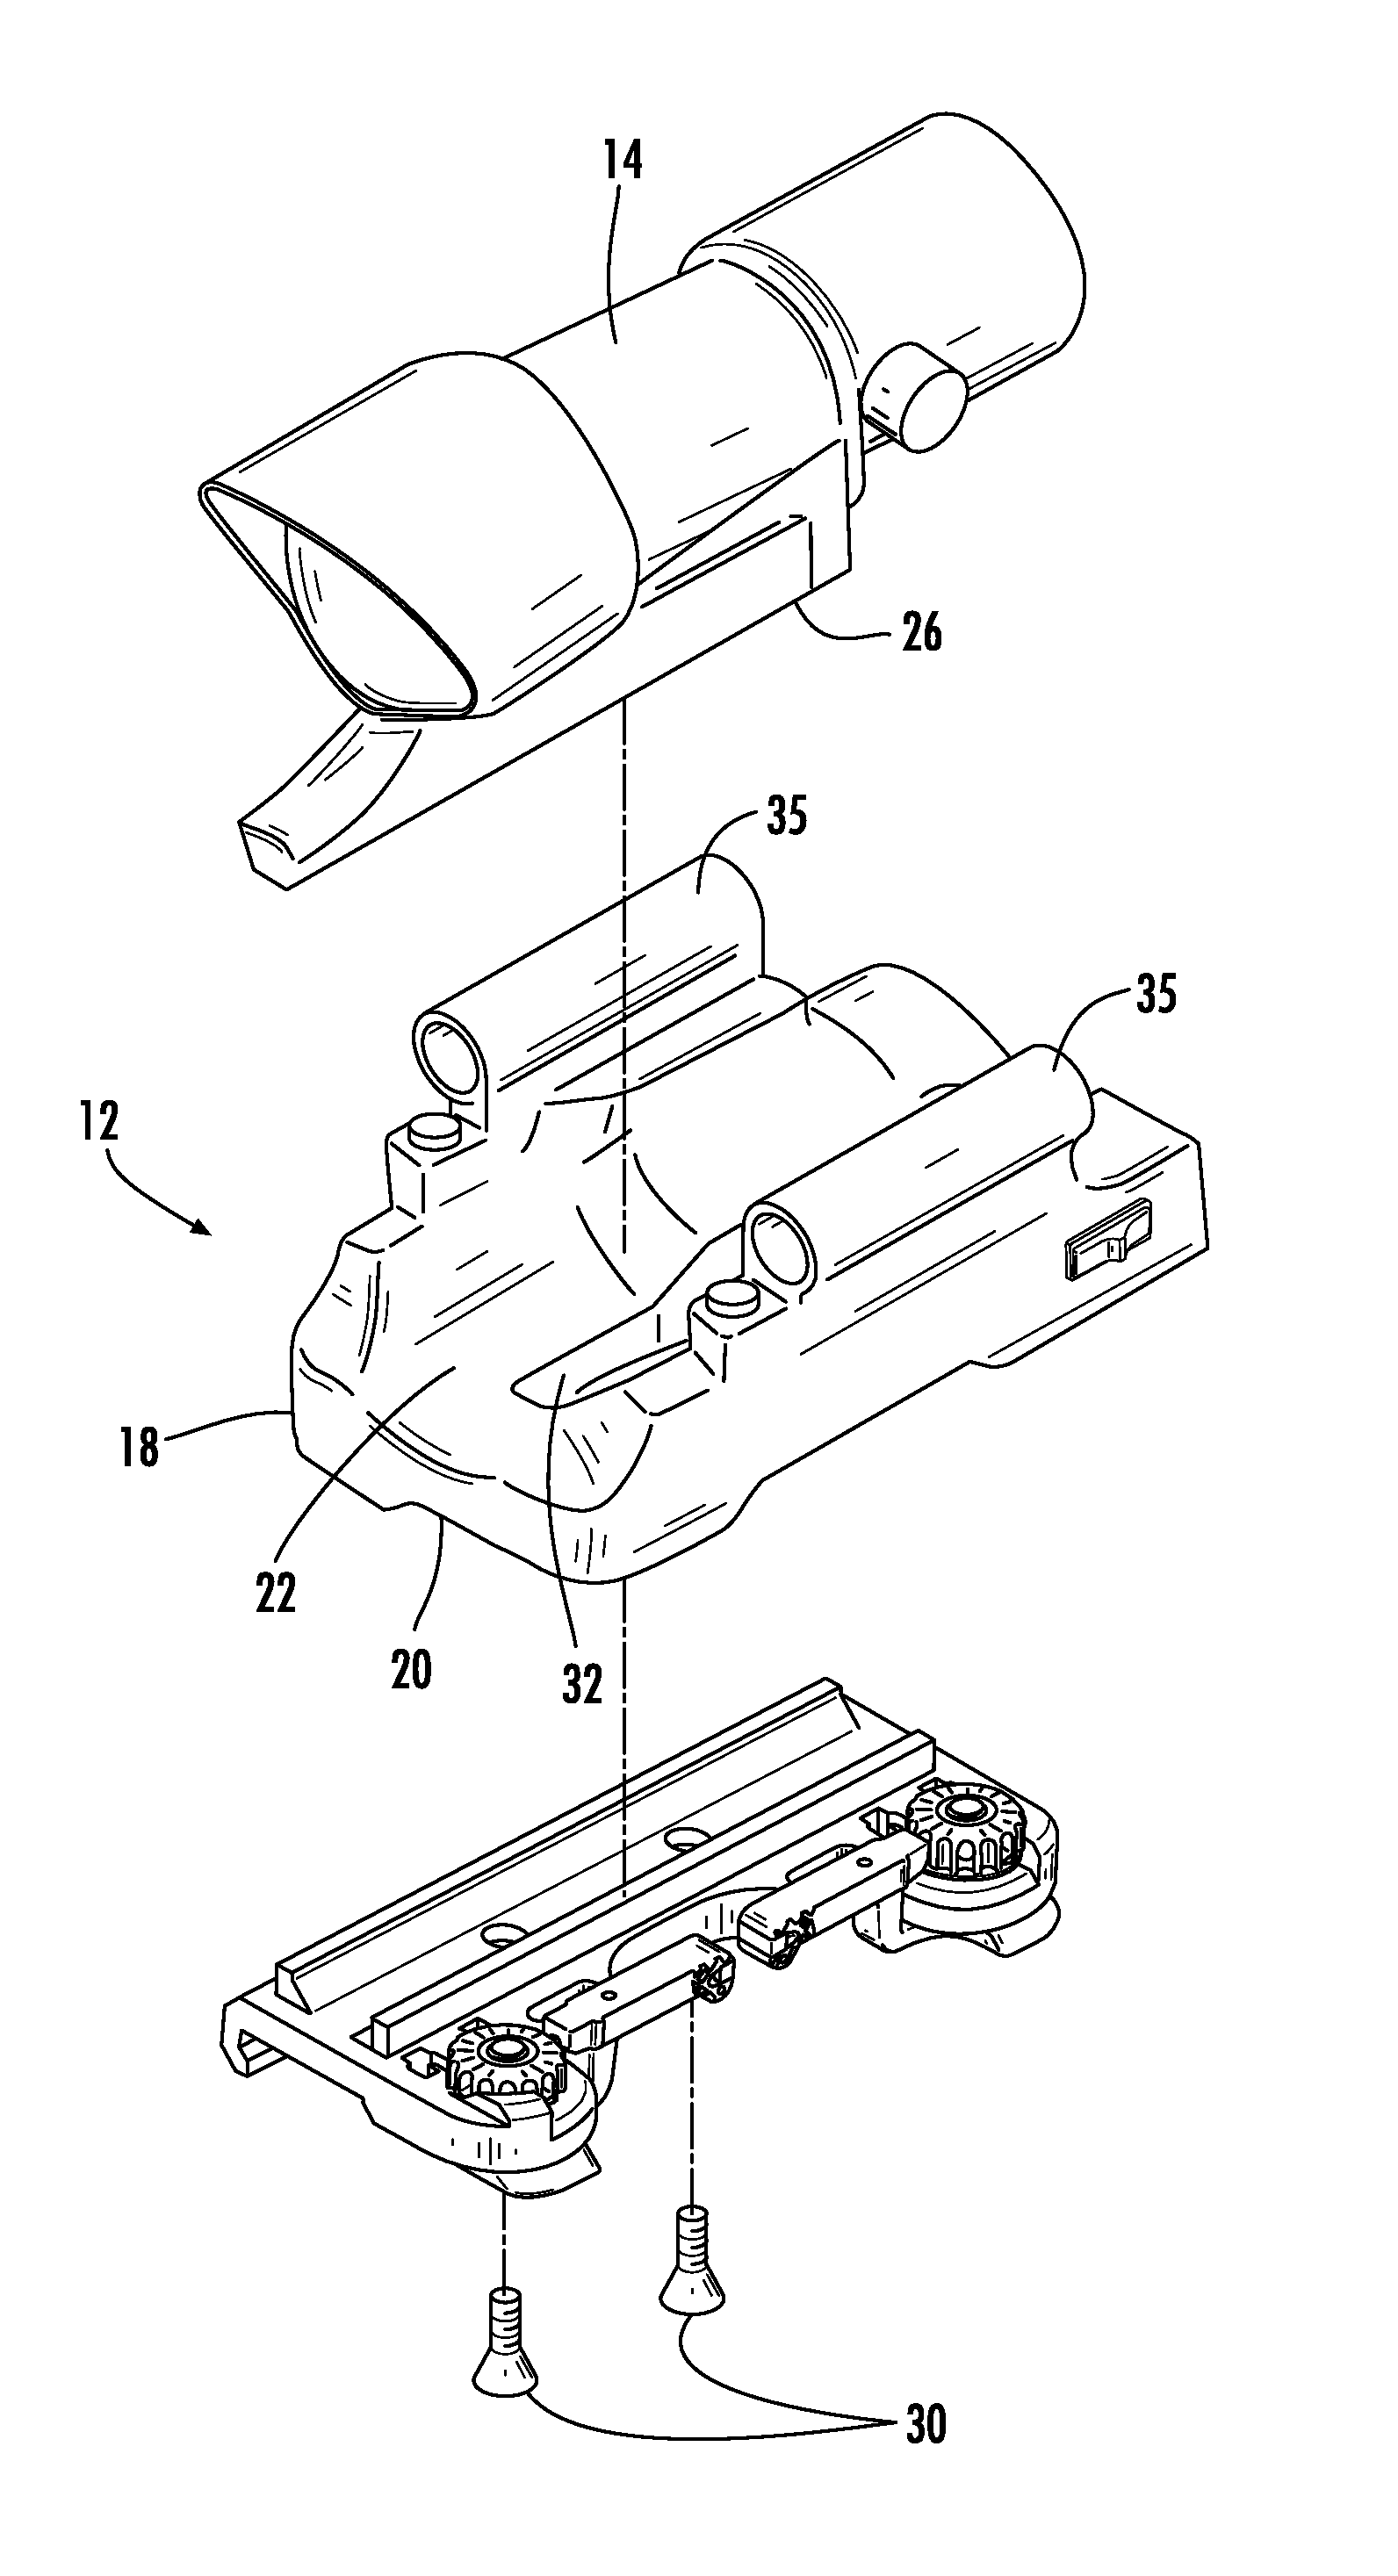 Accessory module with integrated electronic devices